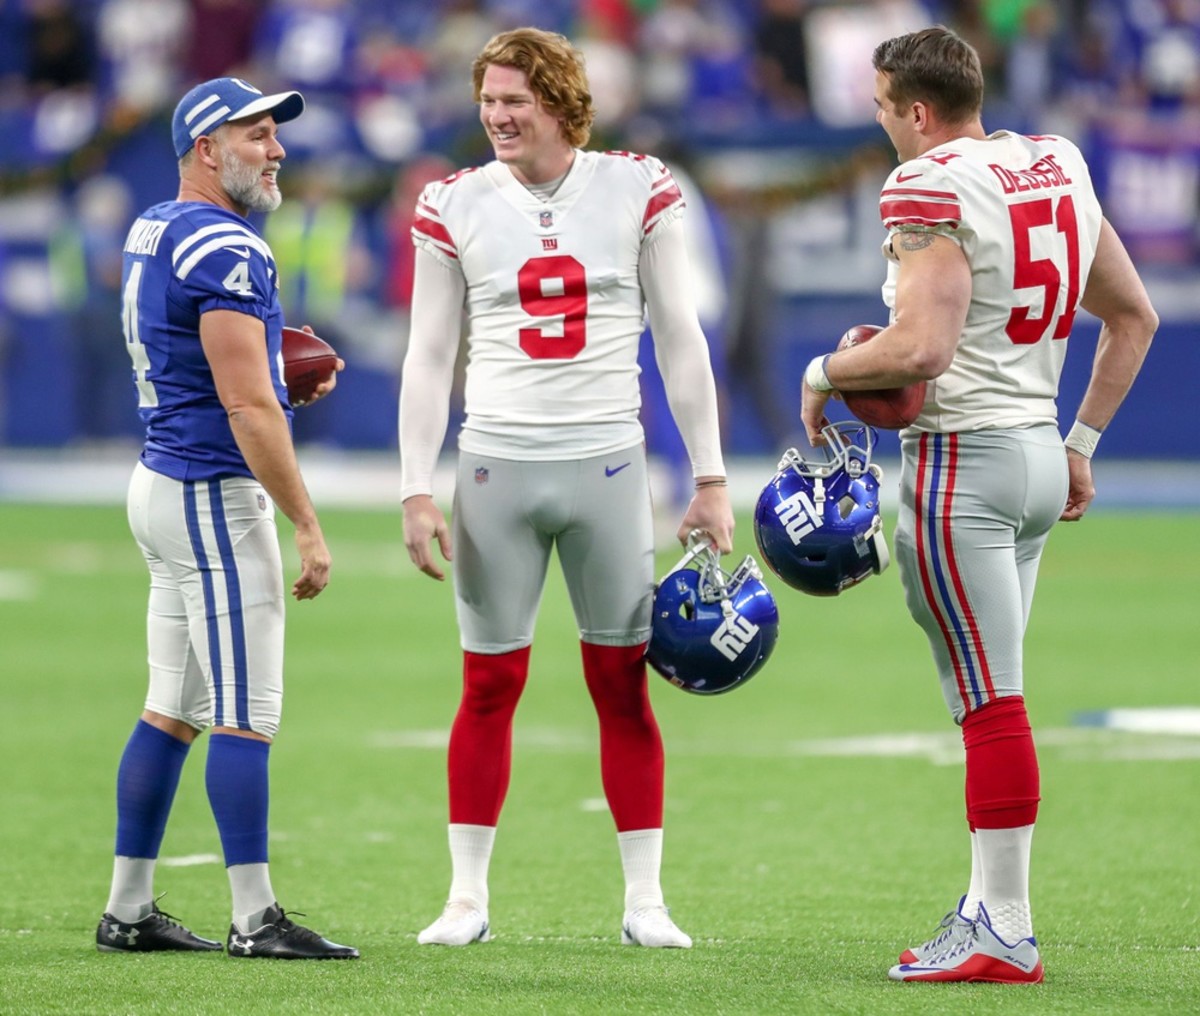 Indianapolis Colts kicker Adam Vinatieri (4) talks with New York Giants punter Riley Dixon (9) and long snapper Zak DeOssie (51) at Lucas Oil Stadium in Indianapolis on Sunday, Dec. 23, 2018. Indianapolis Colts Take On The New York Giants At Lucas Oil Stadium.